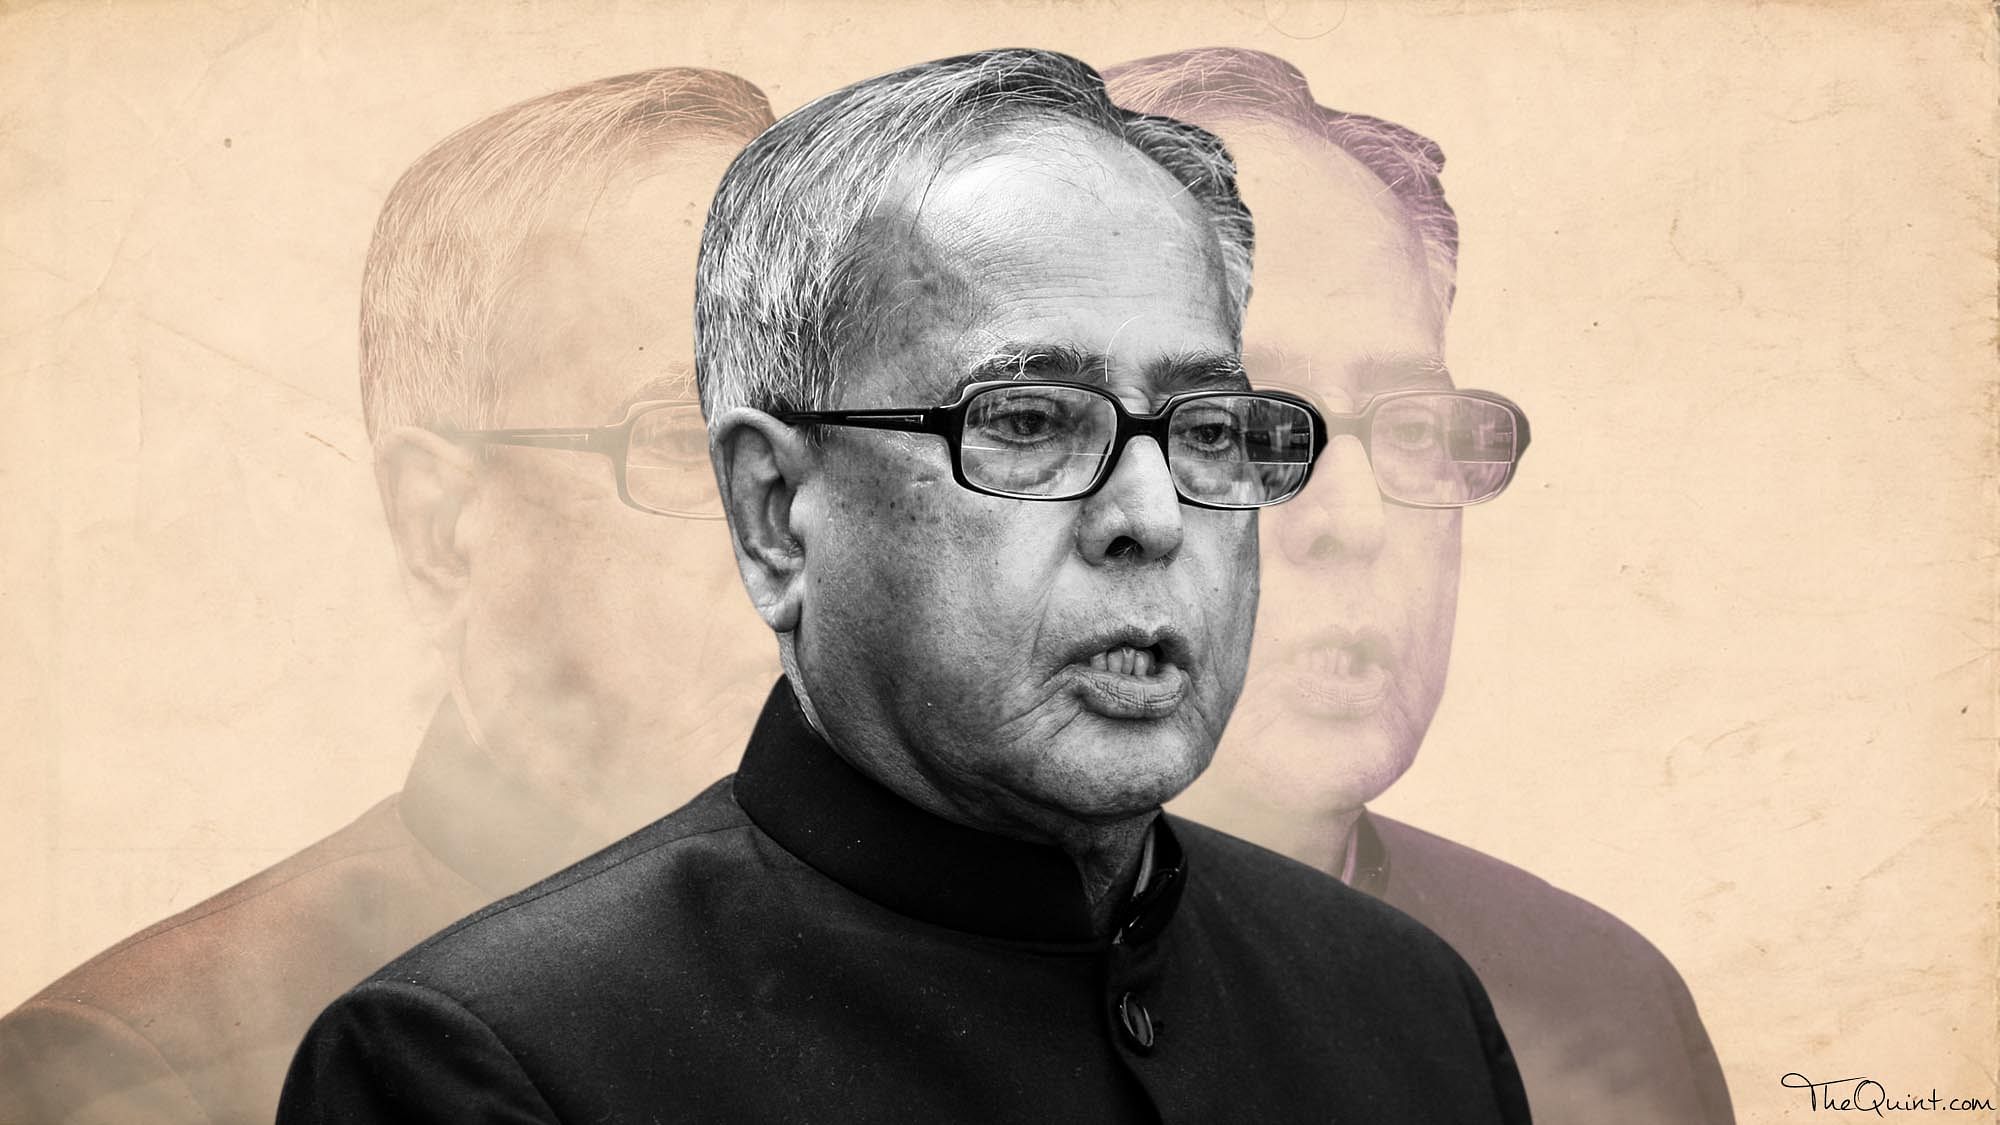 Former President of India Pranab Mukherjee’s book is the third in a series of political memoirs penned by him after <i>The Indira Years</i>&nbsp;and <i>The Turbulent Years.</i>&nbsp; &nbsp;